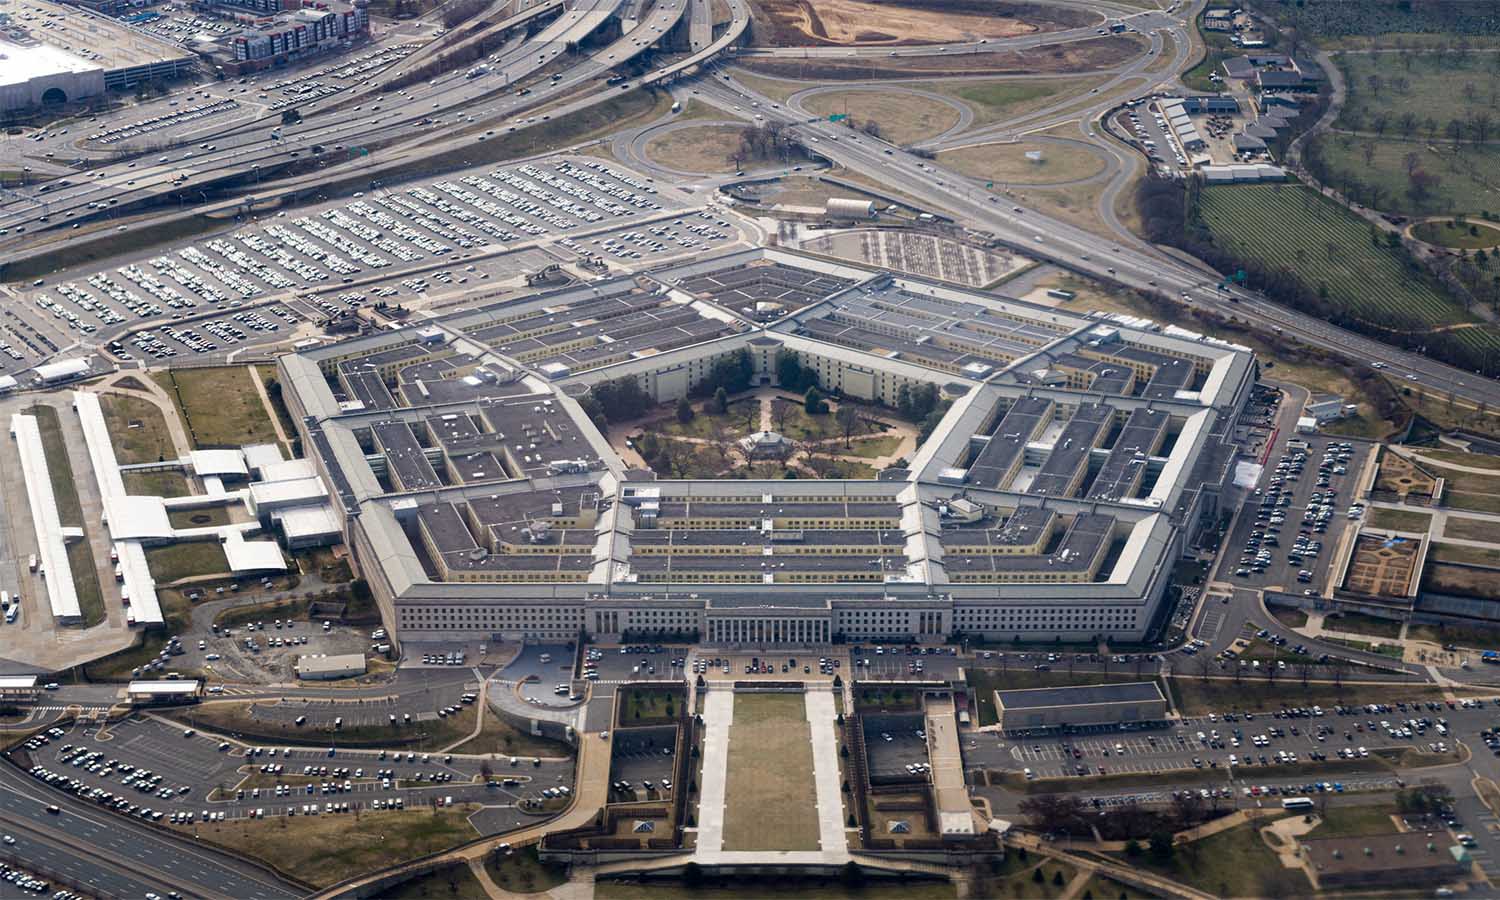 The US Department of Defense (Pentagon) in Washington state - March 3, 2022 (Reuters)